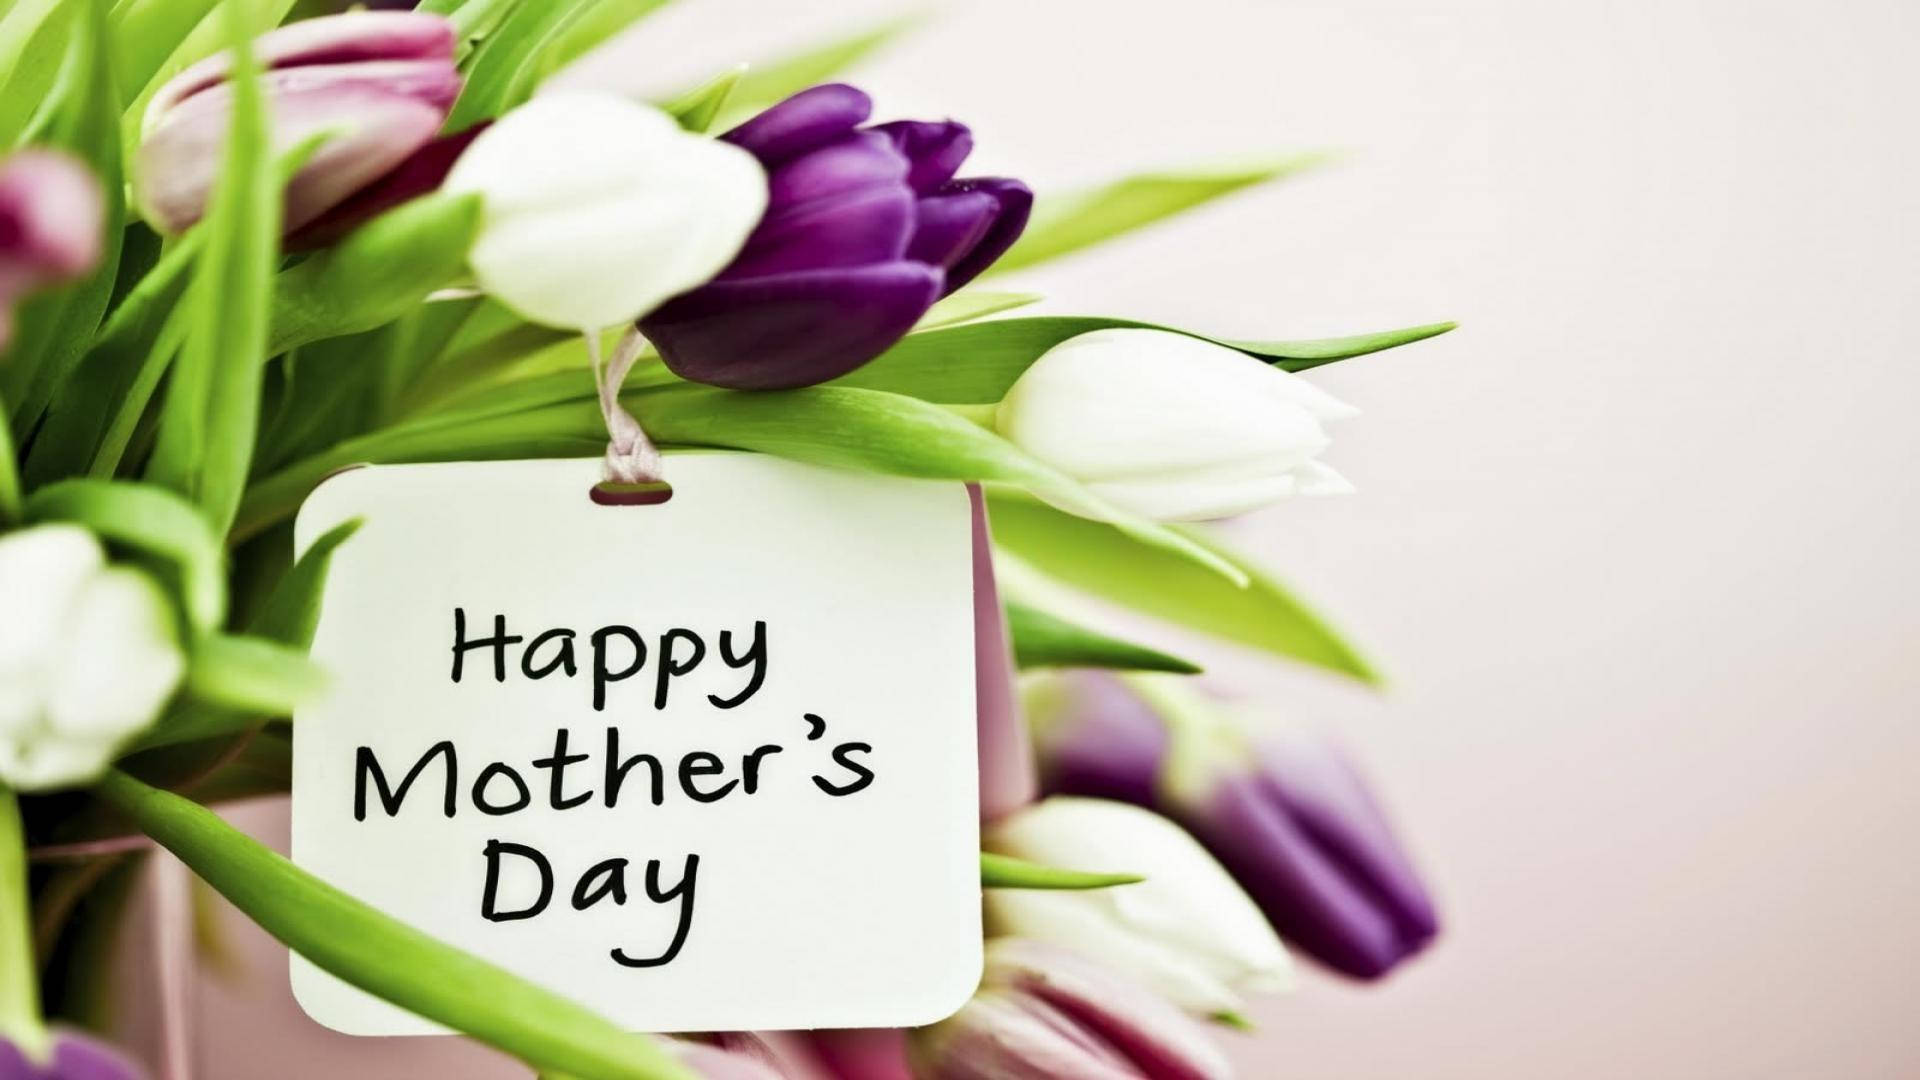 Happy Mothers Day Violet Roses Wallpaper